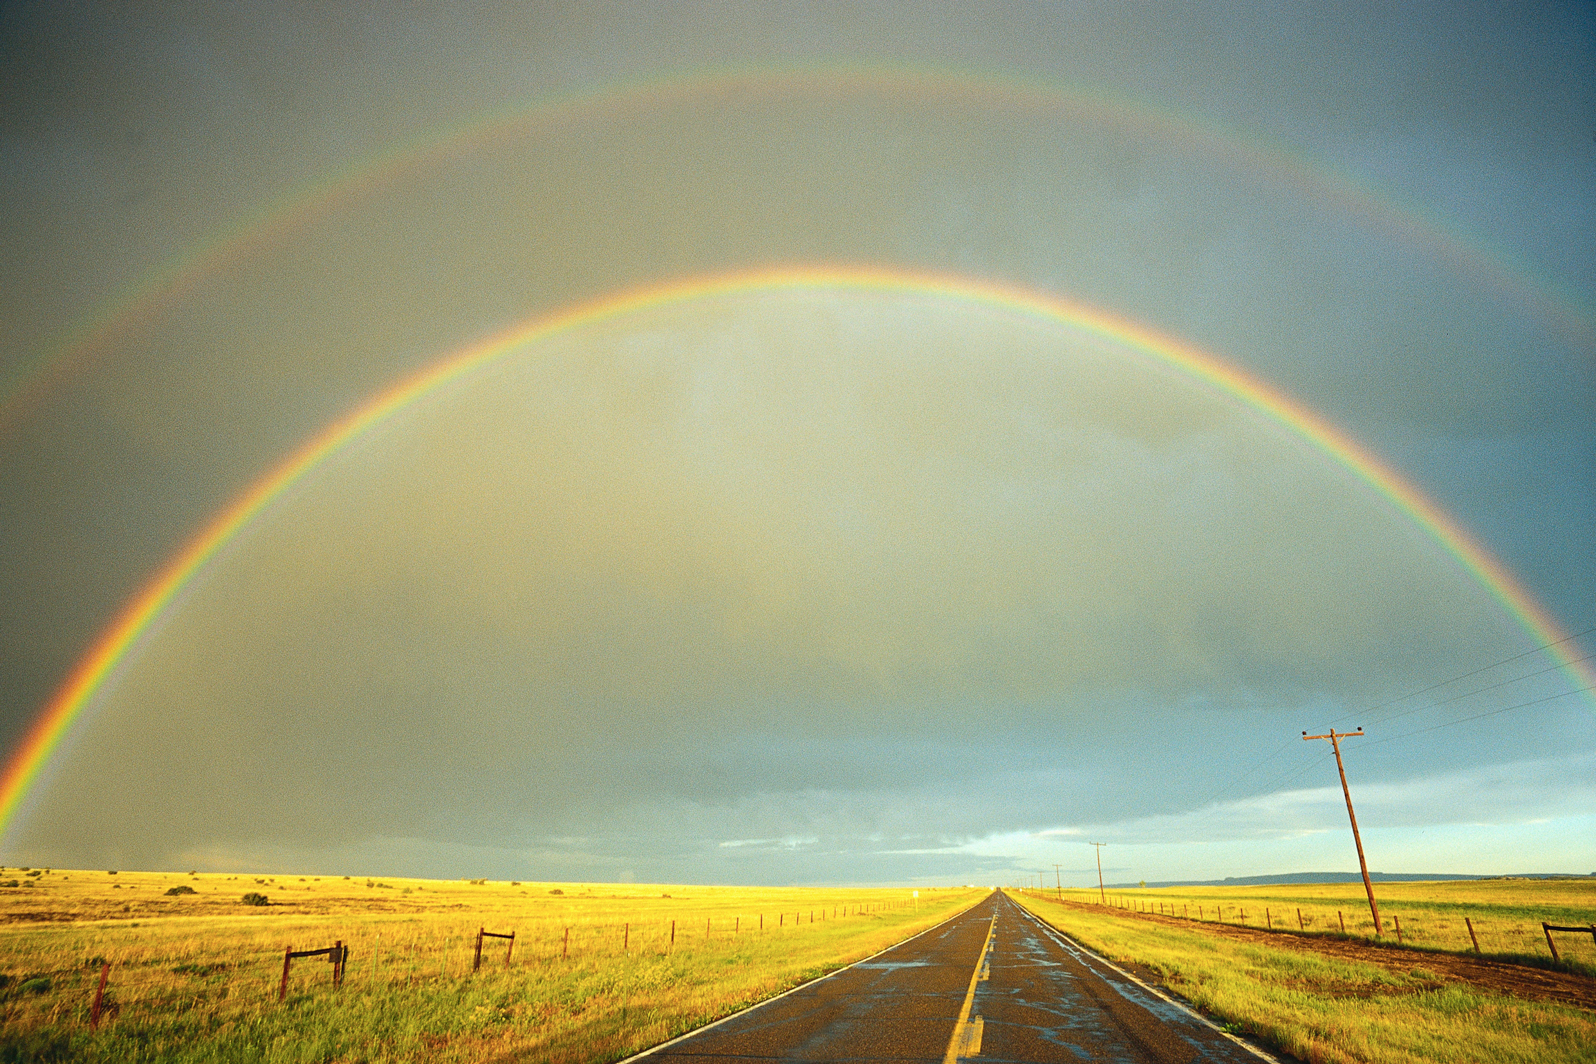 A rainbow stretches over a country road in Kansas. Image by Fuse / Getty